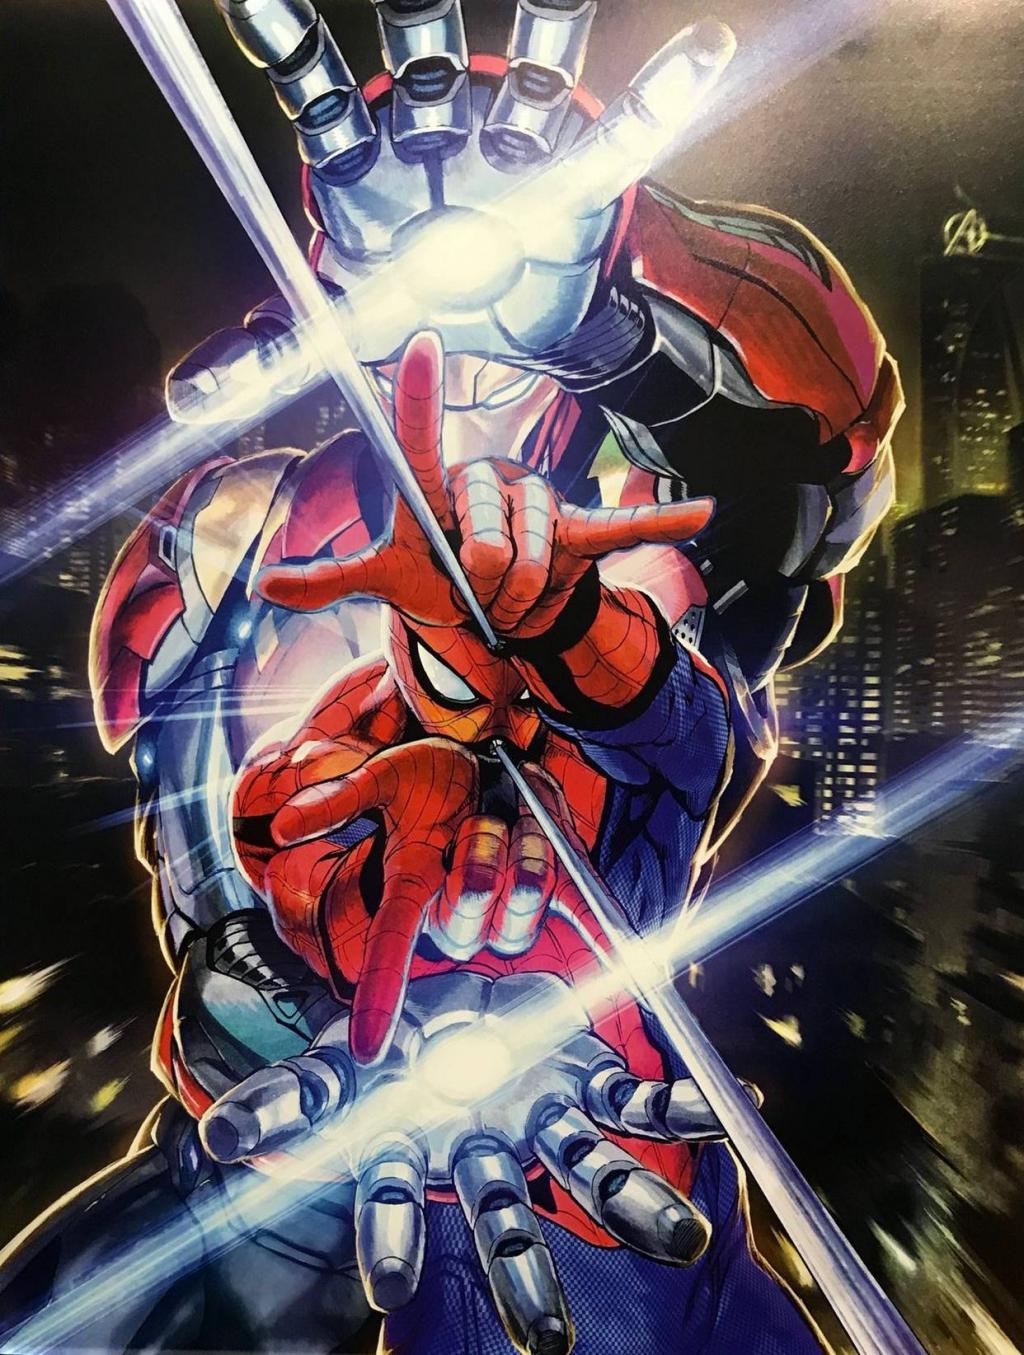 iron_man_peter_parker_spider_man_and_tony_stark_spider_man_far_from_home_and_etc_drawn_by_murata_yuusuke_76635384fc1ad6378a.jpg